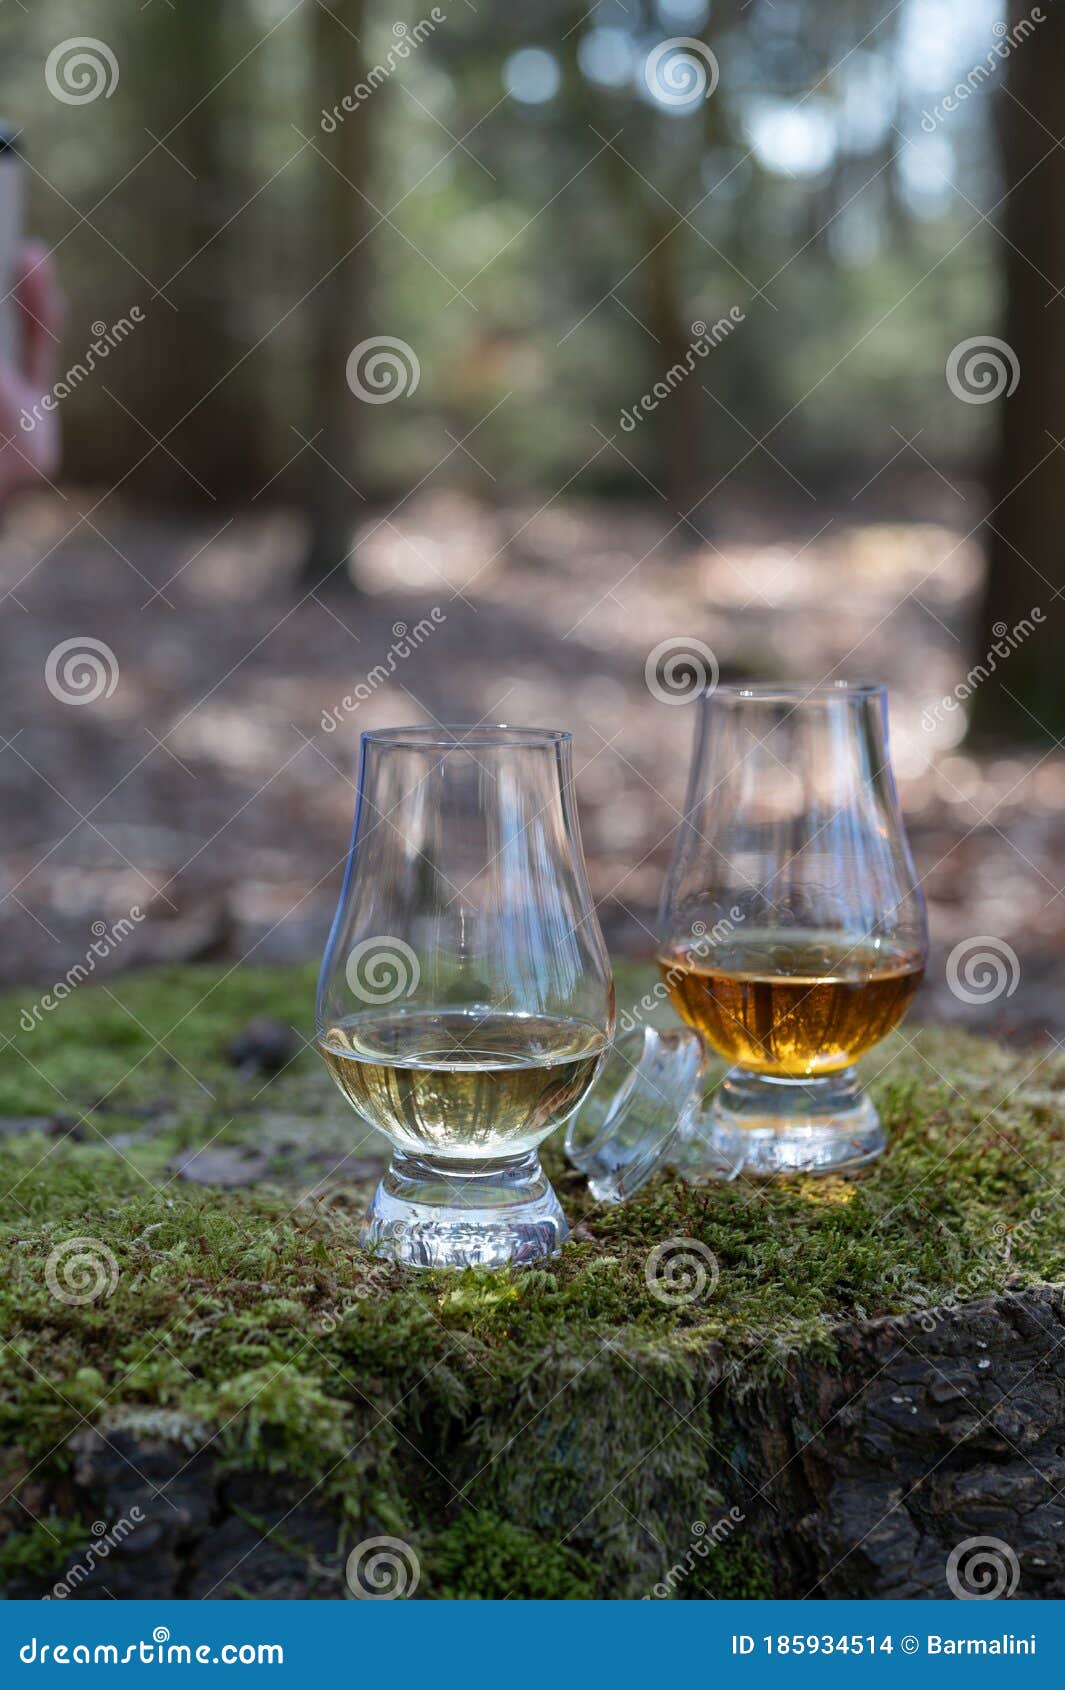 Tasting of Scotch Single Malt Whisky from Islay Island, Most Intensely ...